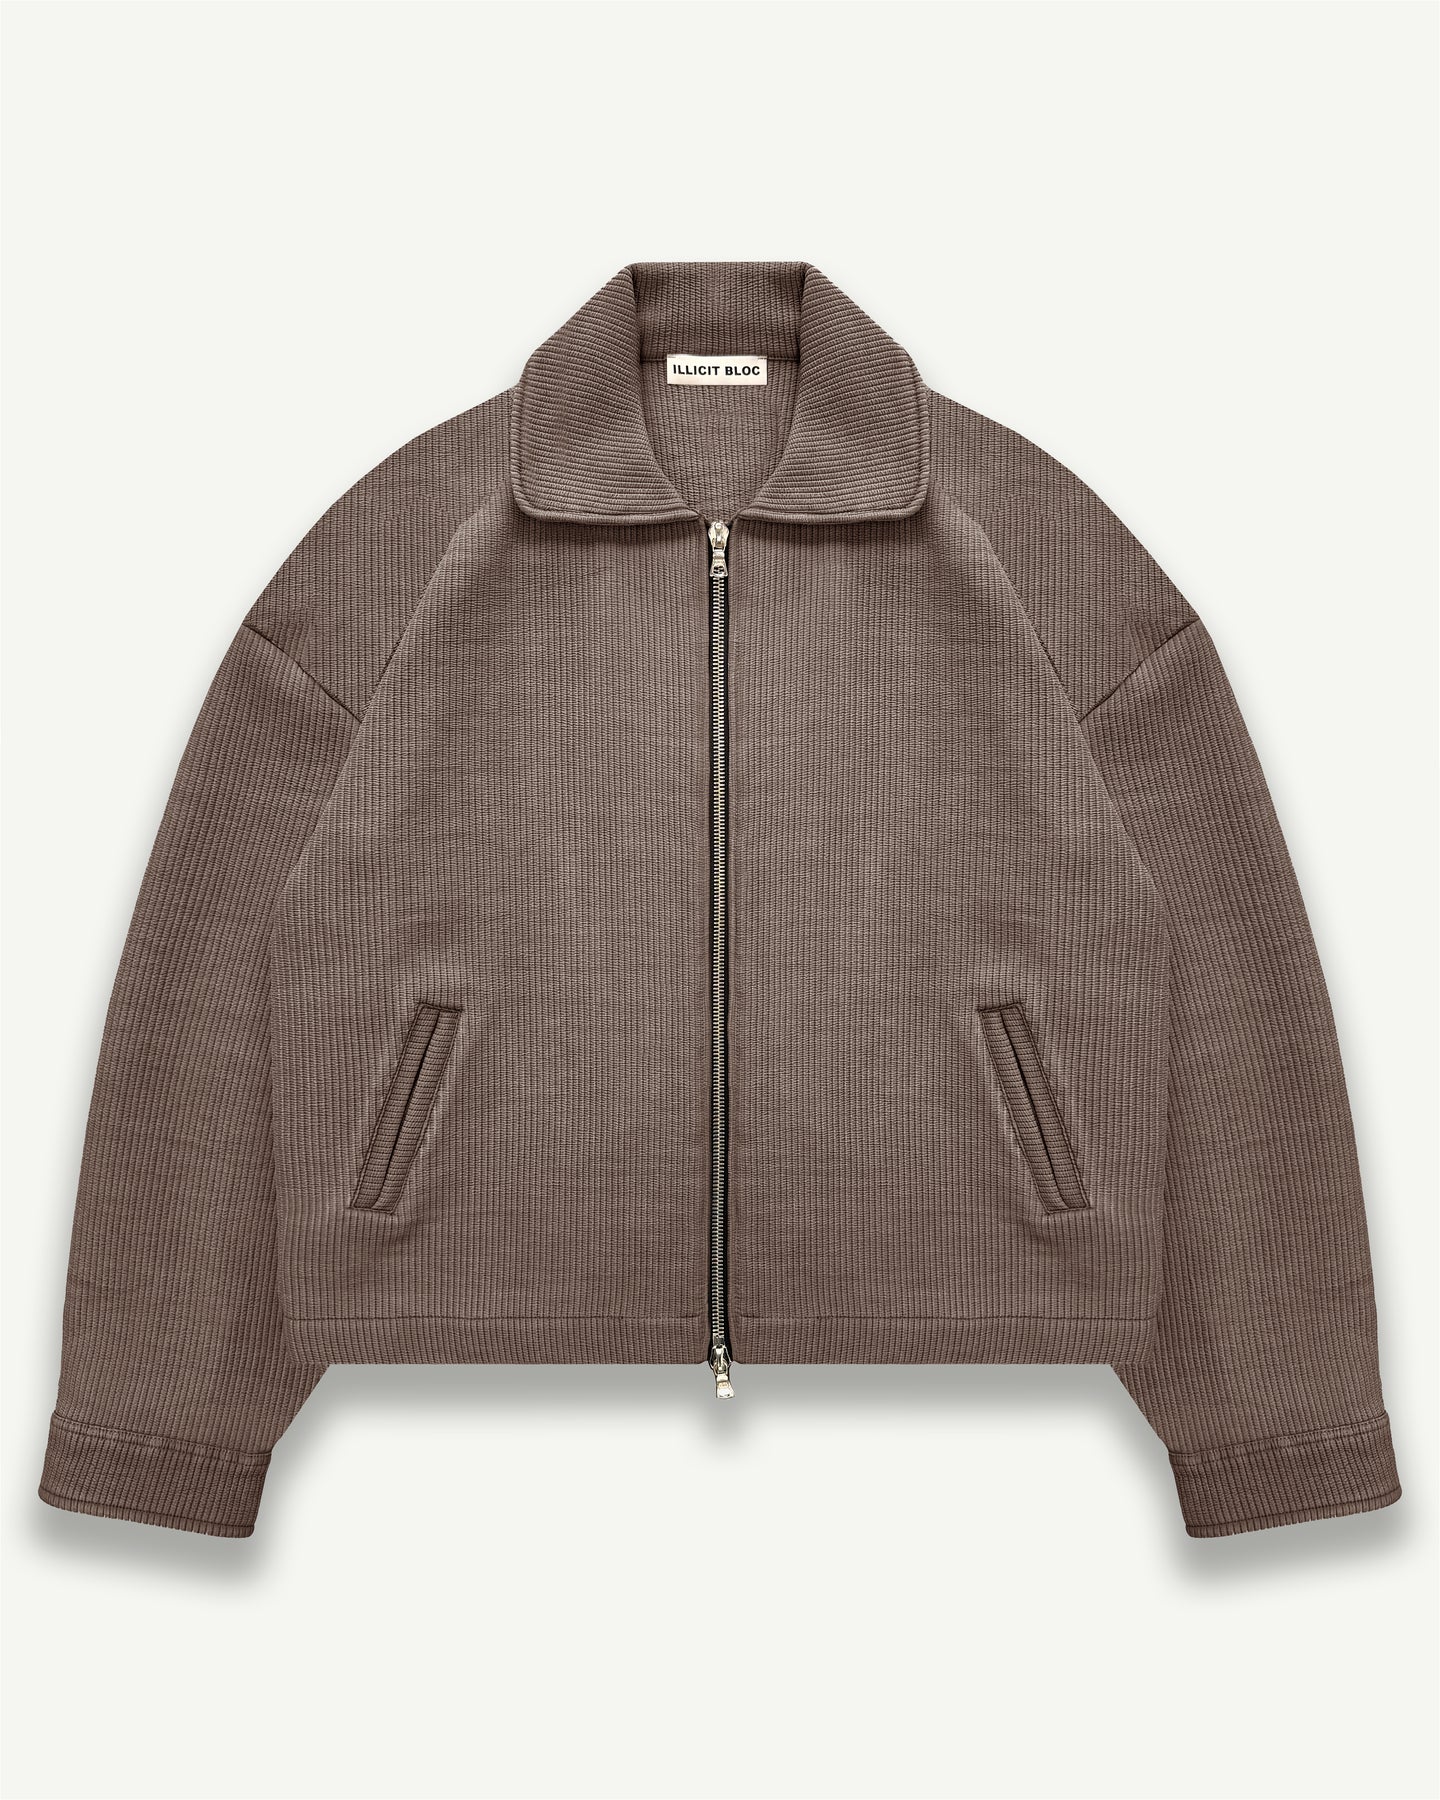 DRILL JACKET - WASHED BROWN